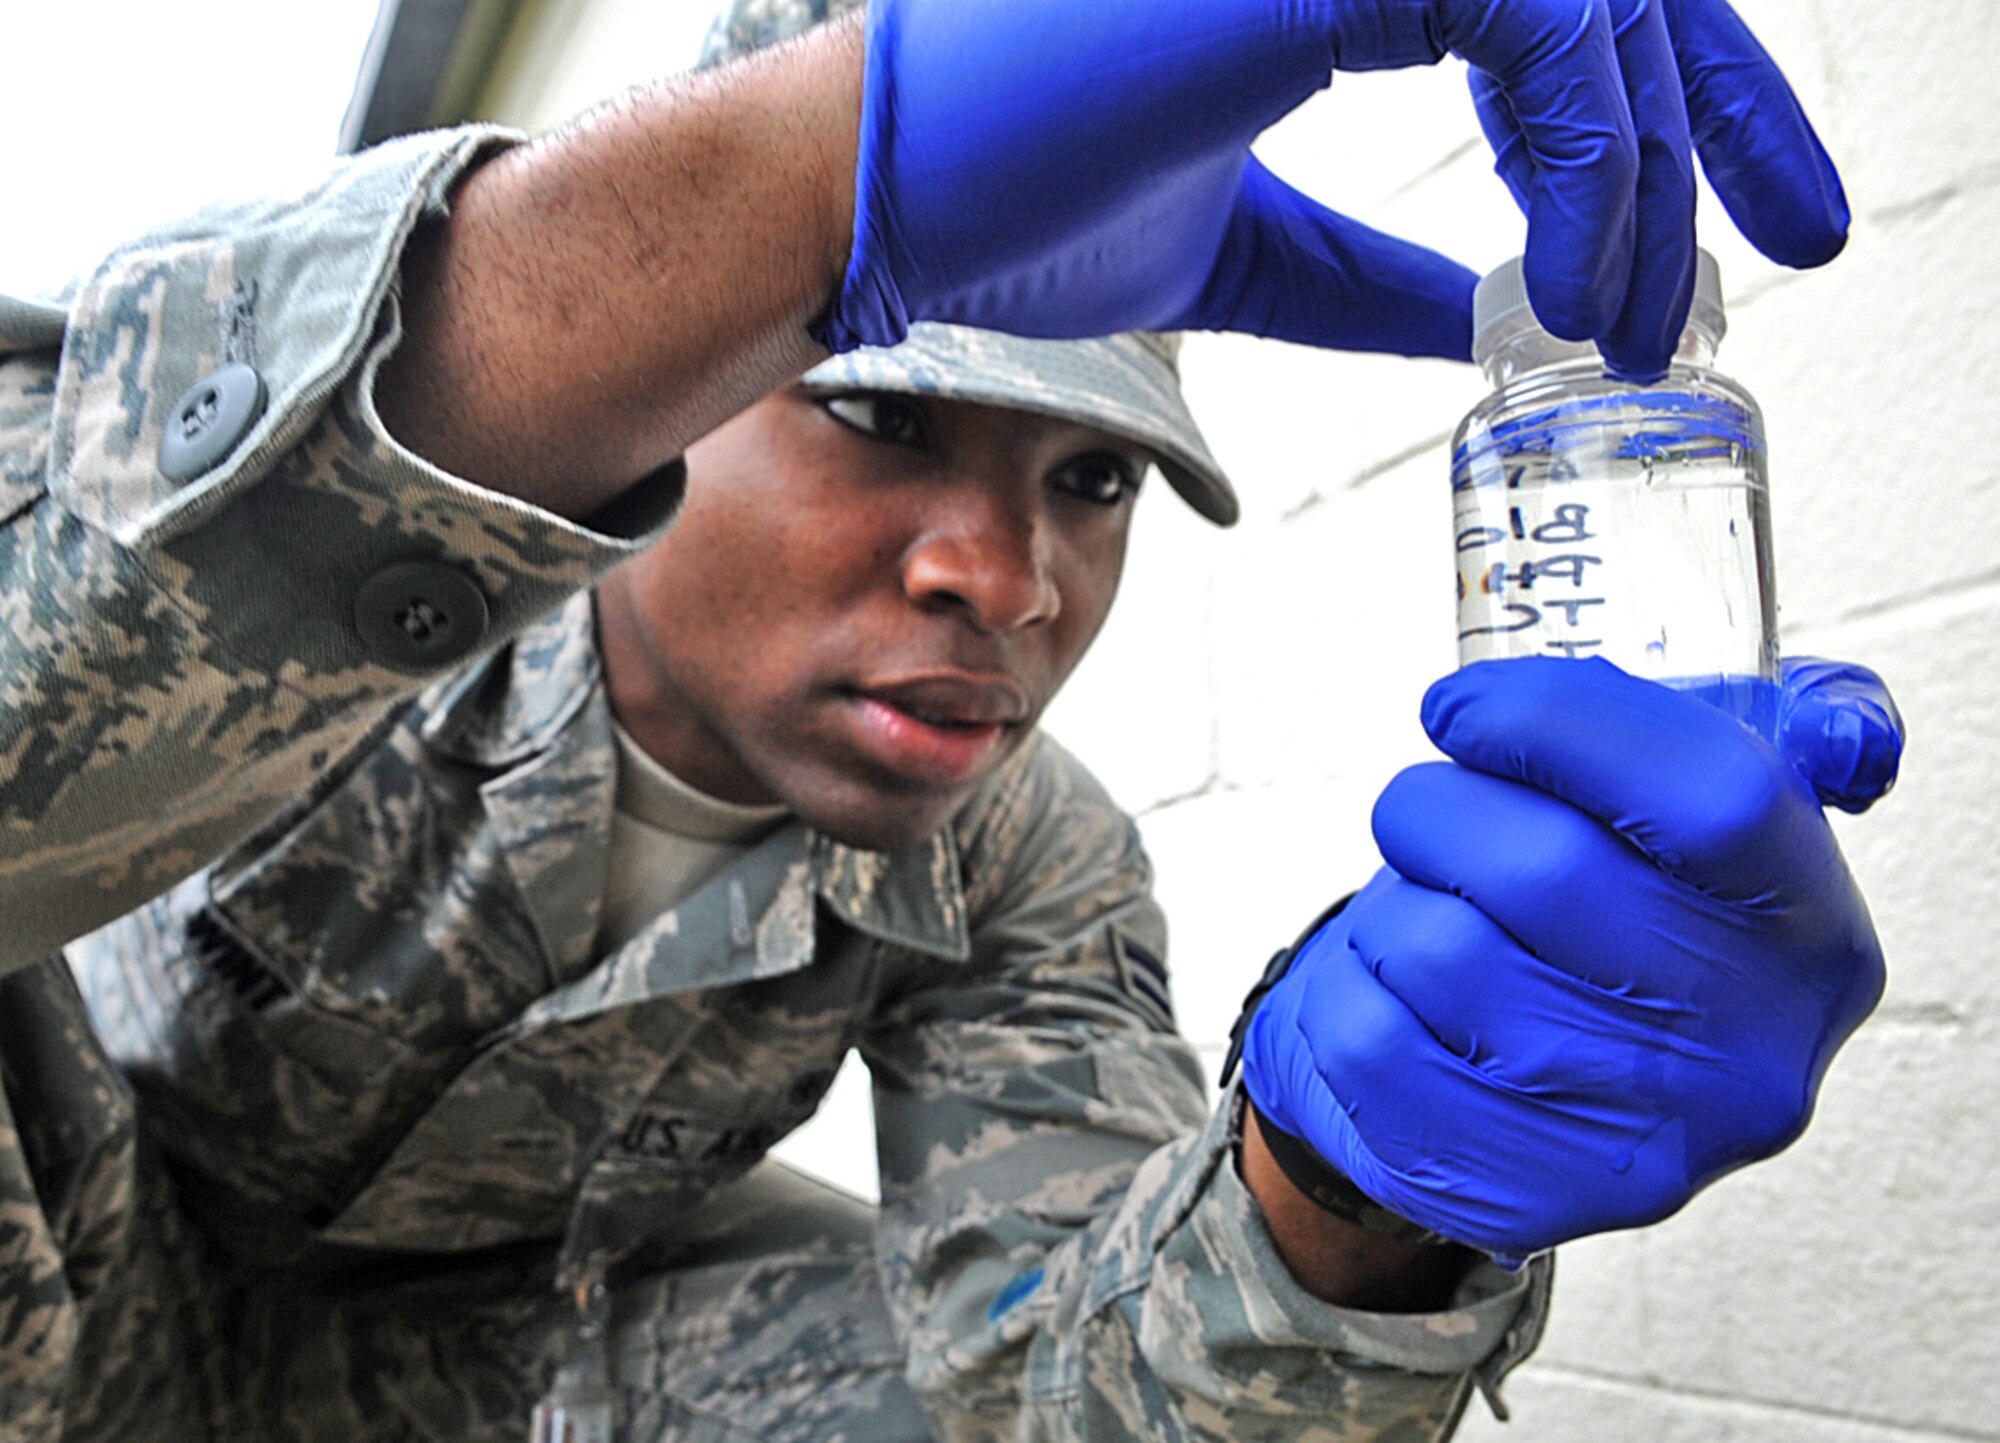 U.S. Air Force Airman 1st Class Oshane Wint collects a water sample for testing on Seymour Johnson Air Force Base, N.C., May 1, 2012. As part of their preventative health mission, 4th Aerospace Medicine Squadron bioenvironmental apprentices must conduct 14 monthly quality control tests on different water sources around base. Wint, 4th AMDS bioenvironmental apprentice, hails from Englewood, N.J. (U.S. Air Force photo/Airman 1st Class Aubrey Robinson/Released)